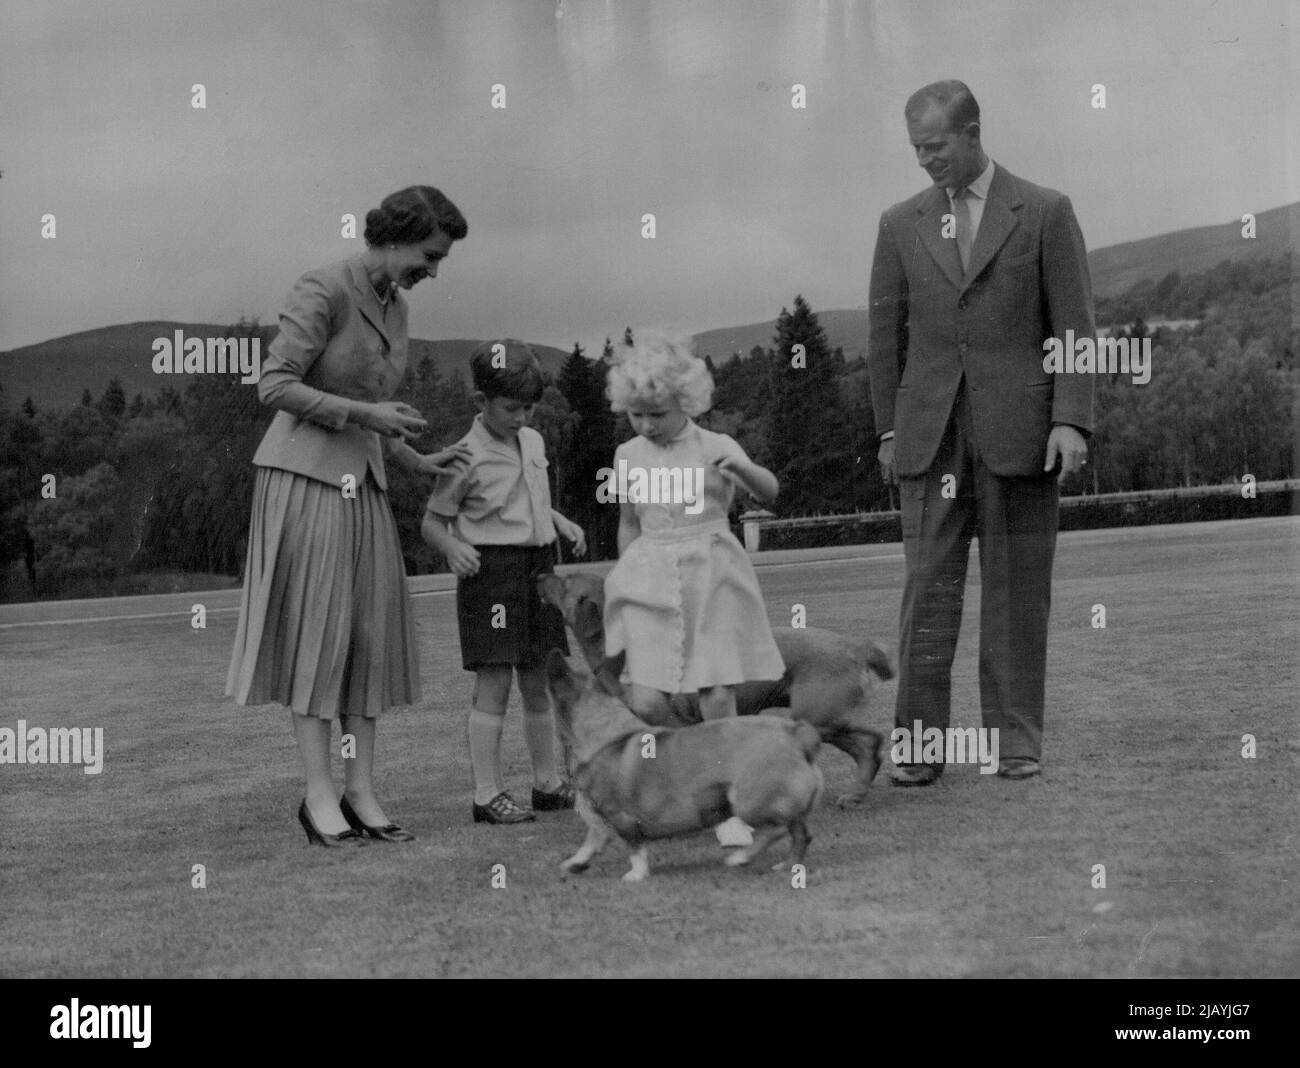 This Embargo Applies To All Countries Royal Family at Balmoral Queen Elizabeth and the Duke of Edinburgh, with their children, Prince Charles and Princess Anne, Play with the Queen's Corgi 'Sugar' (foreground) and the Duke's 'Candy' during the Royal family's summer holiday at Balmoral Castle, Scotland. September 26, 1955. (Photo by Associated Press Photo). Stock Photo